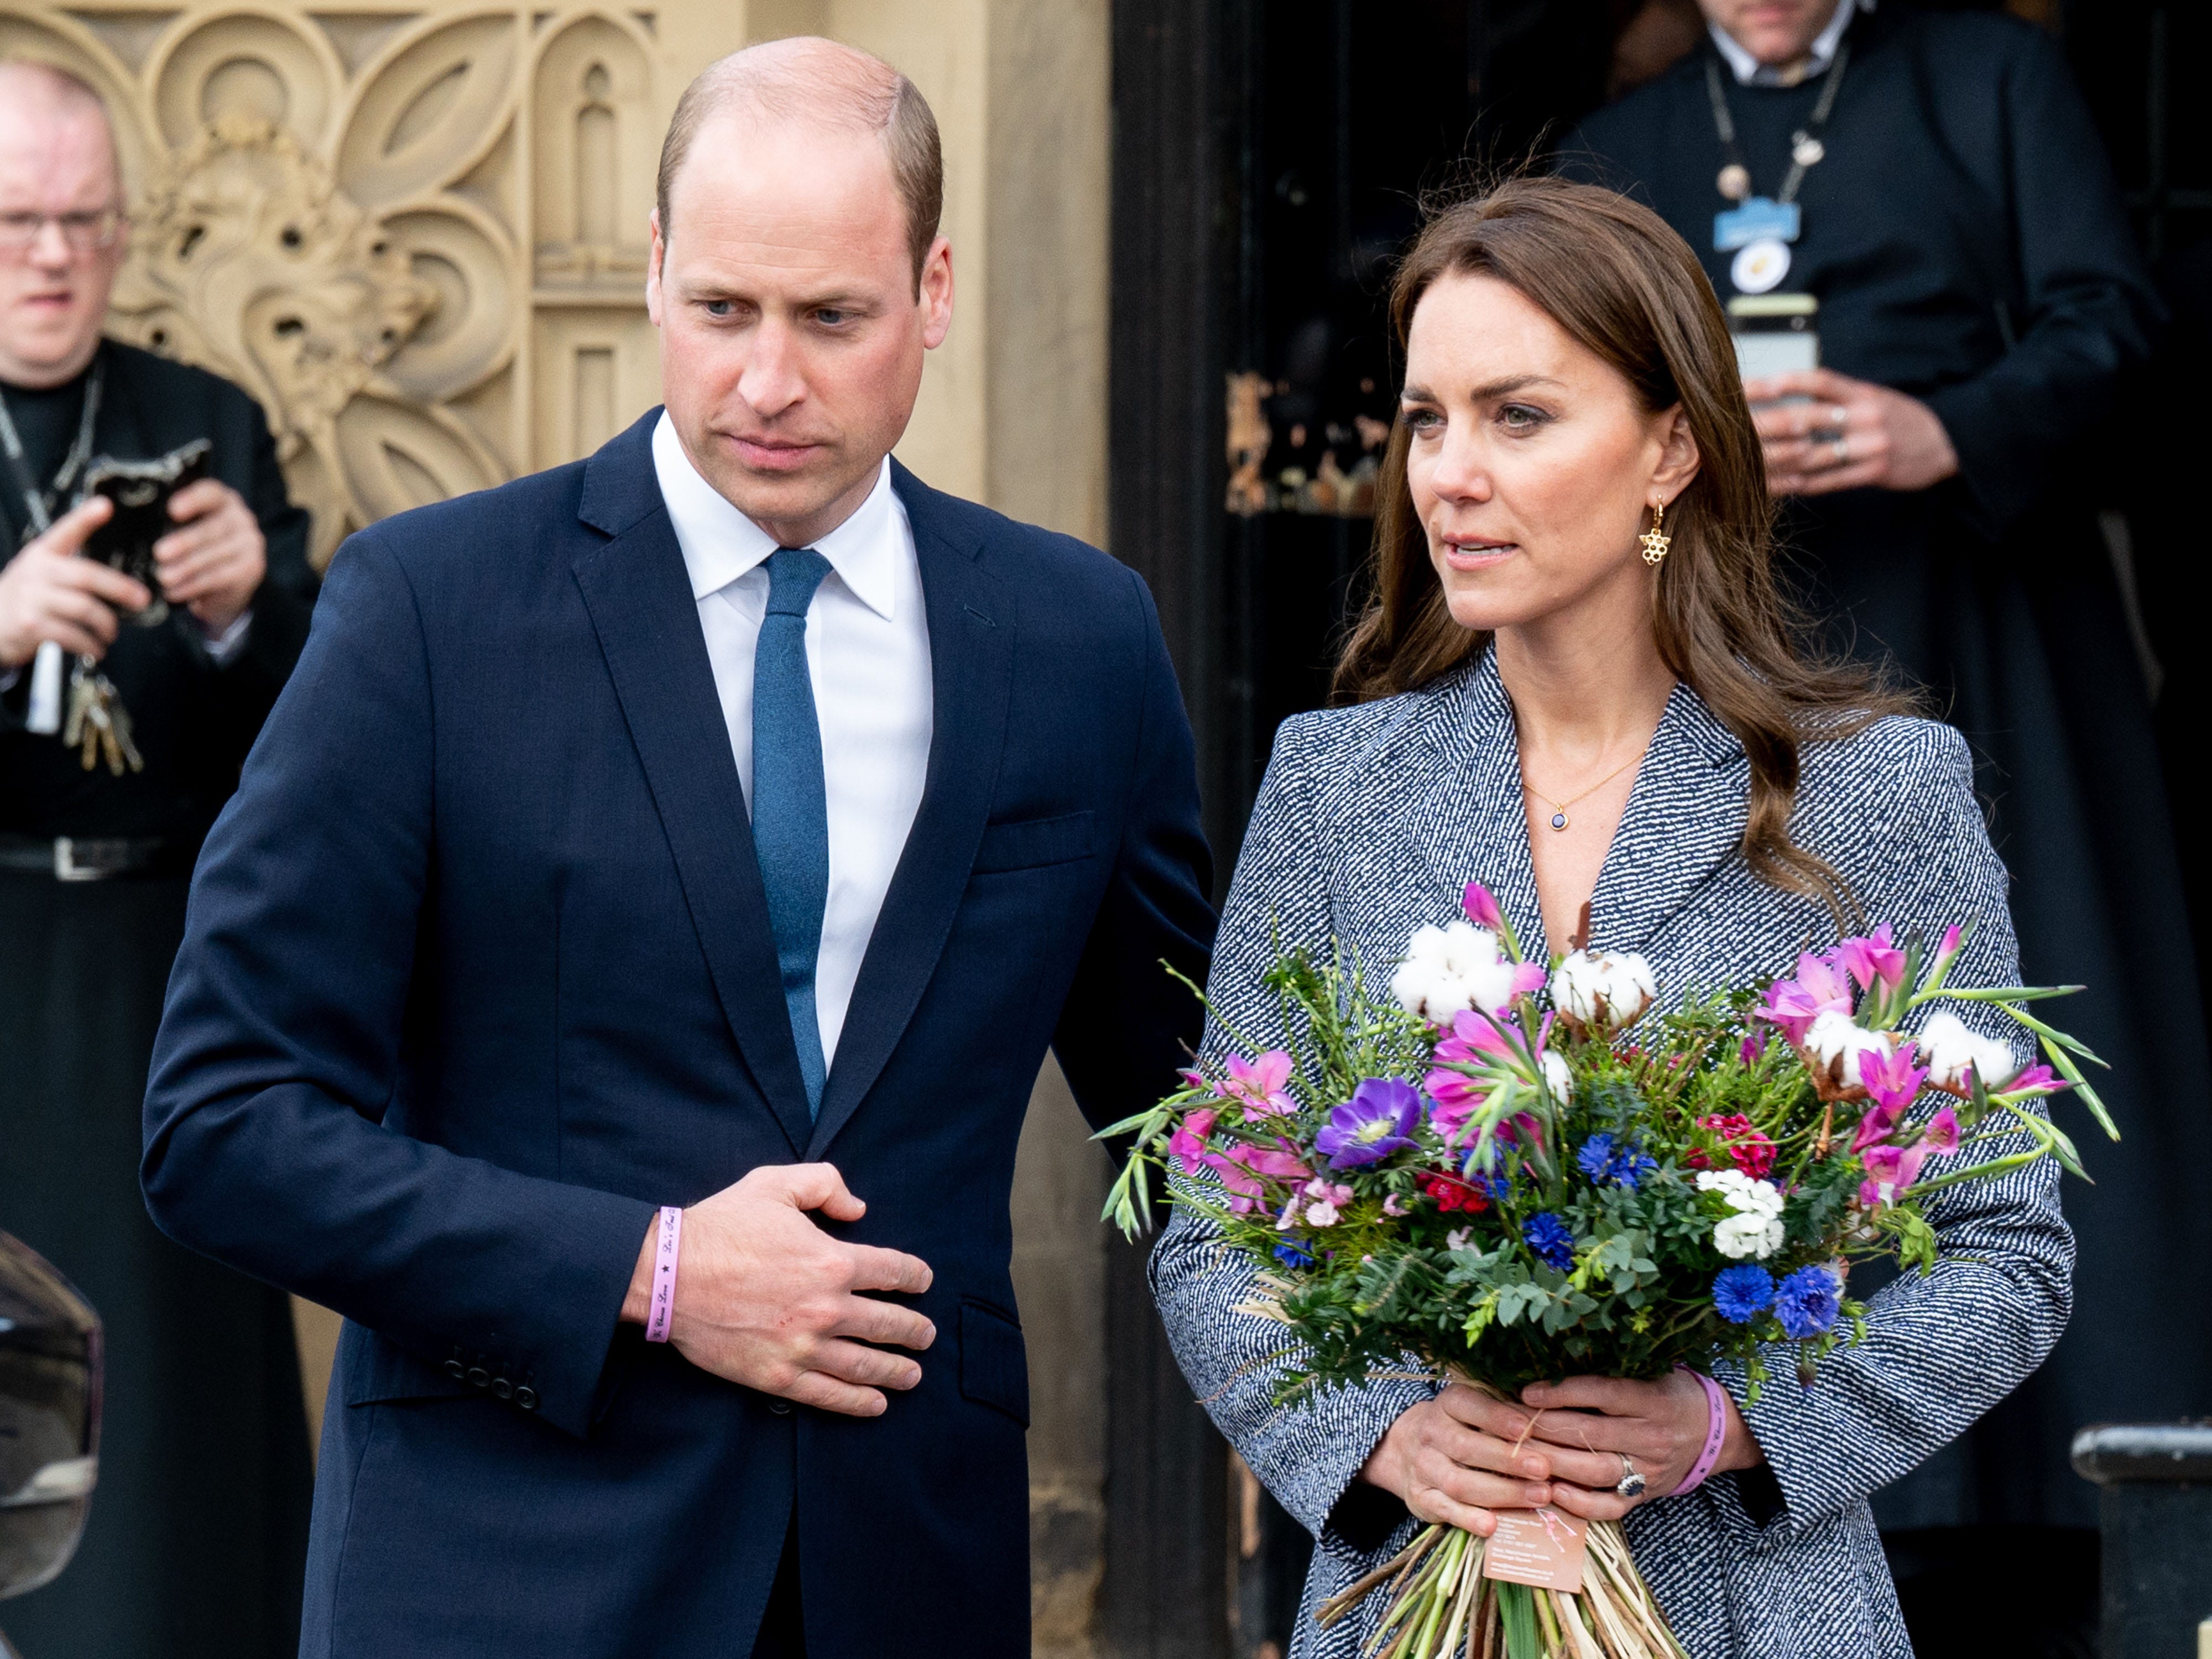 Kate Middleton and Prince William Are 